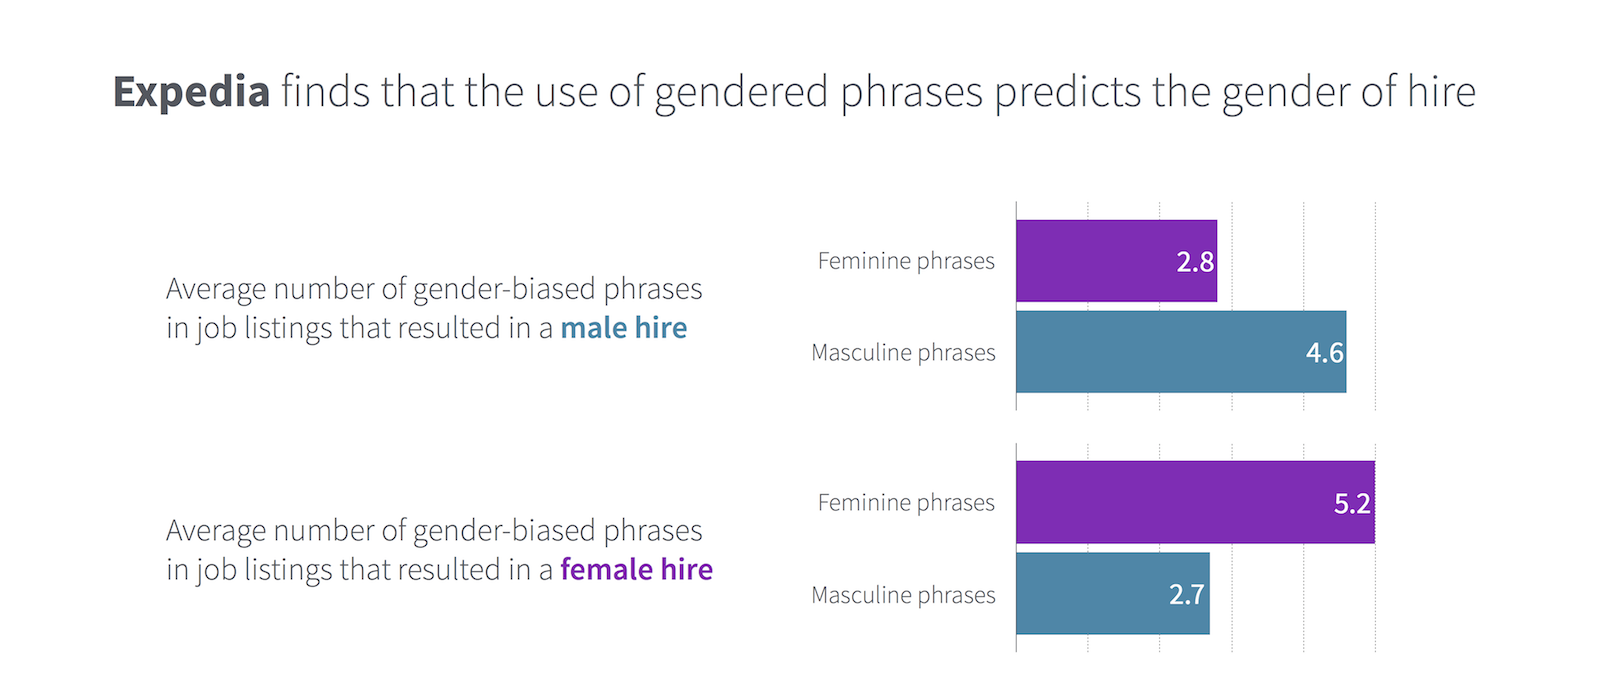 Graph showing the Expedia finds that the use of gendered phrases predicts the gender of hire